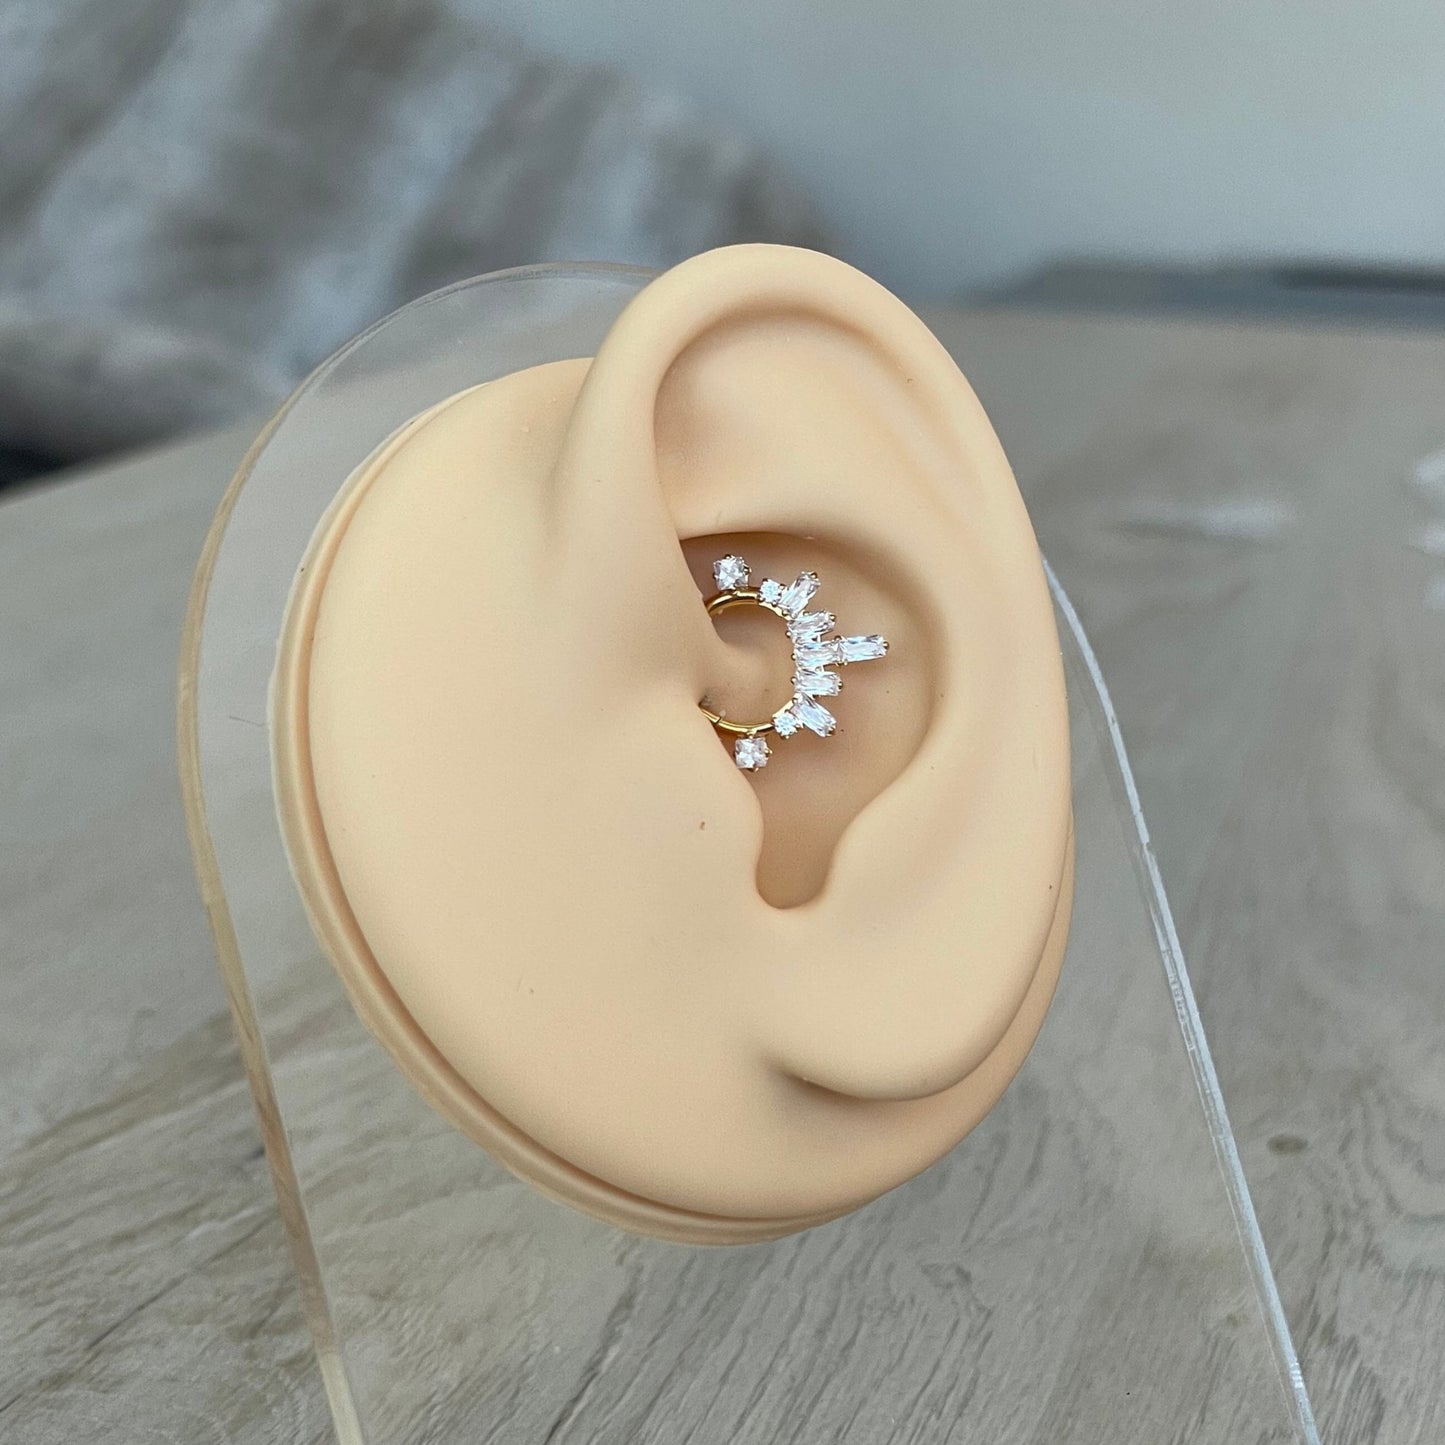 Cute Daith Earring (16G | 8mm or 10mm | Surgical Steel | Silver or Gold)